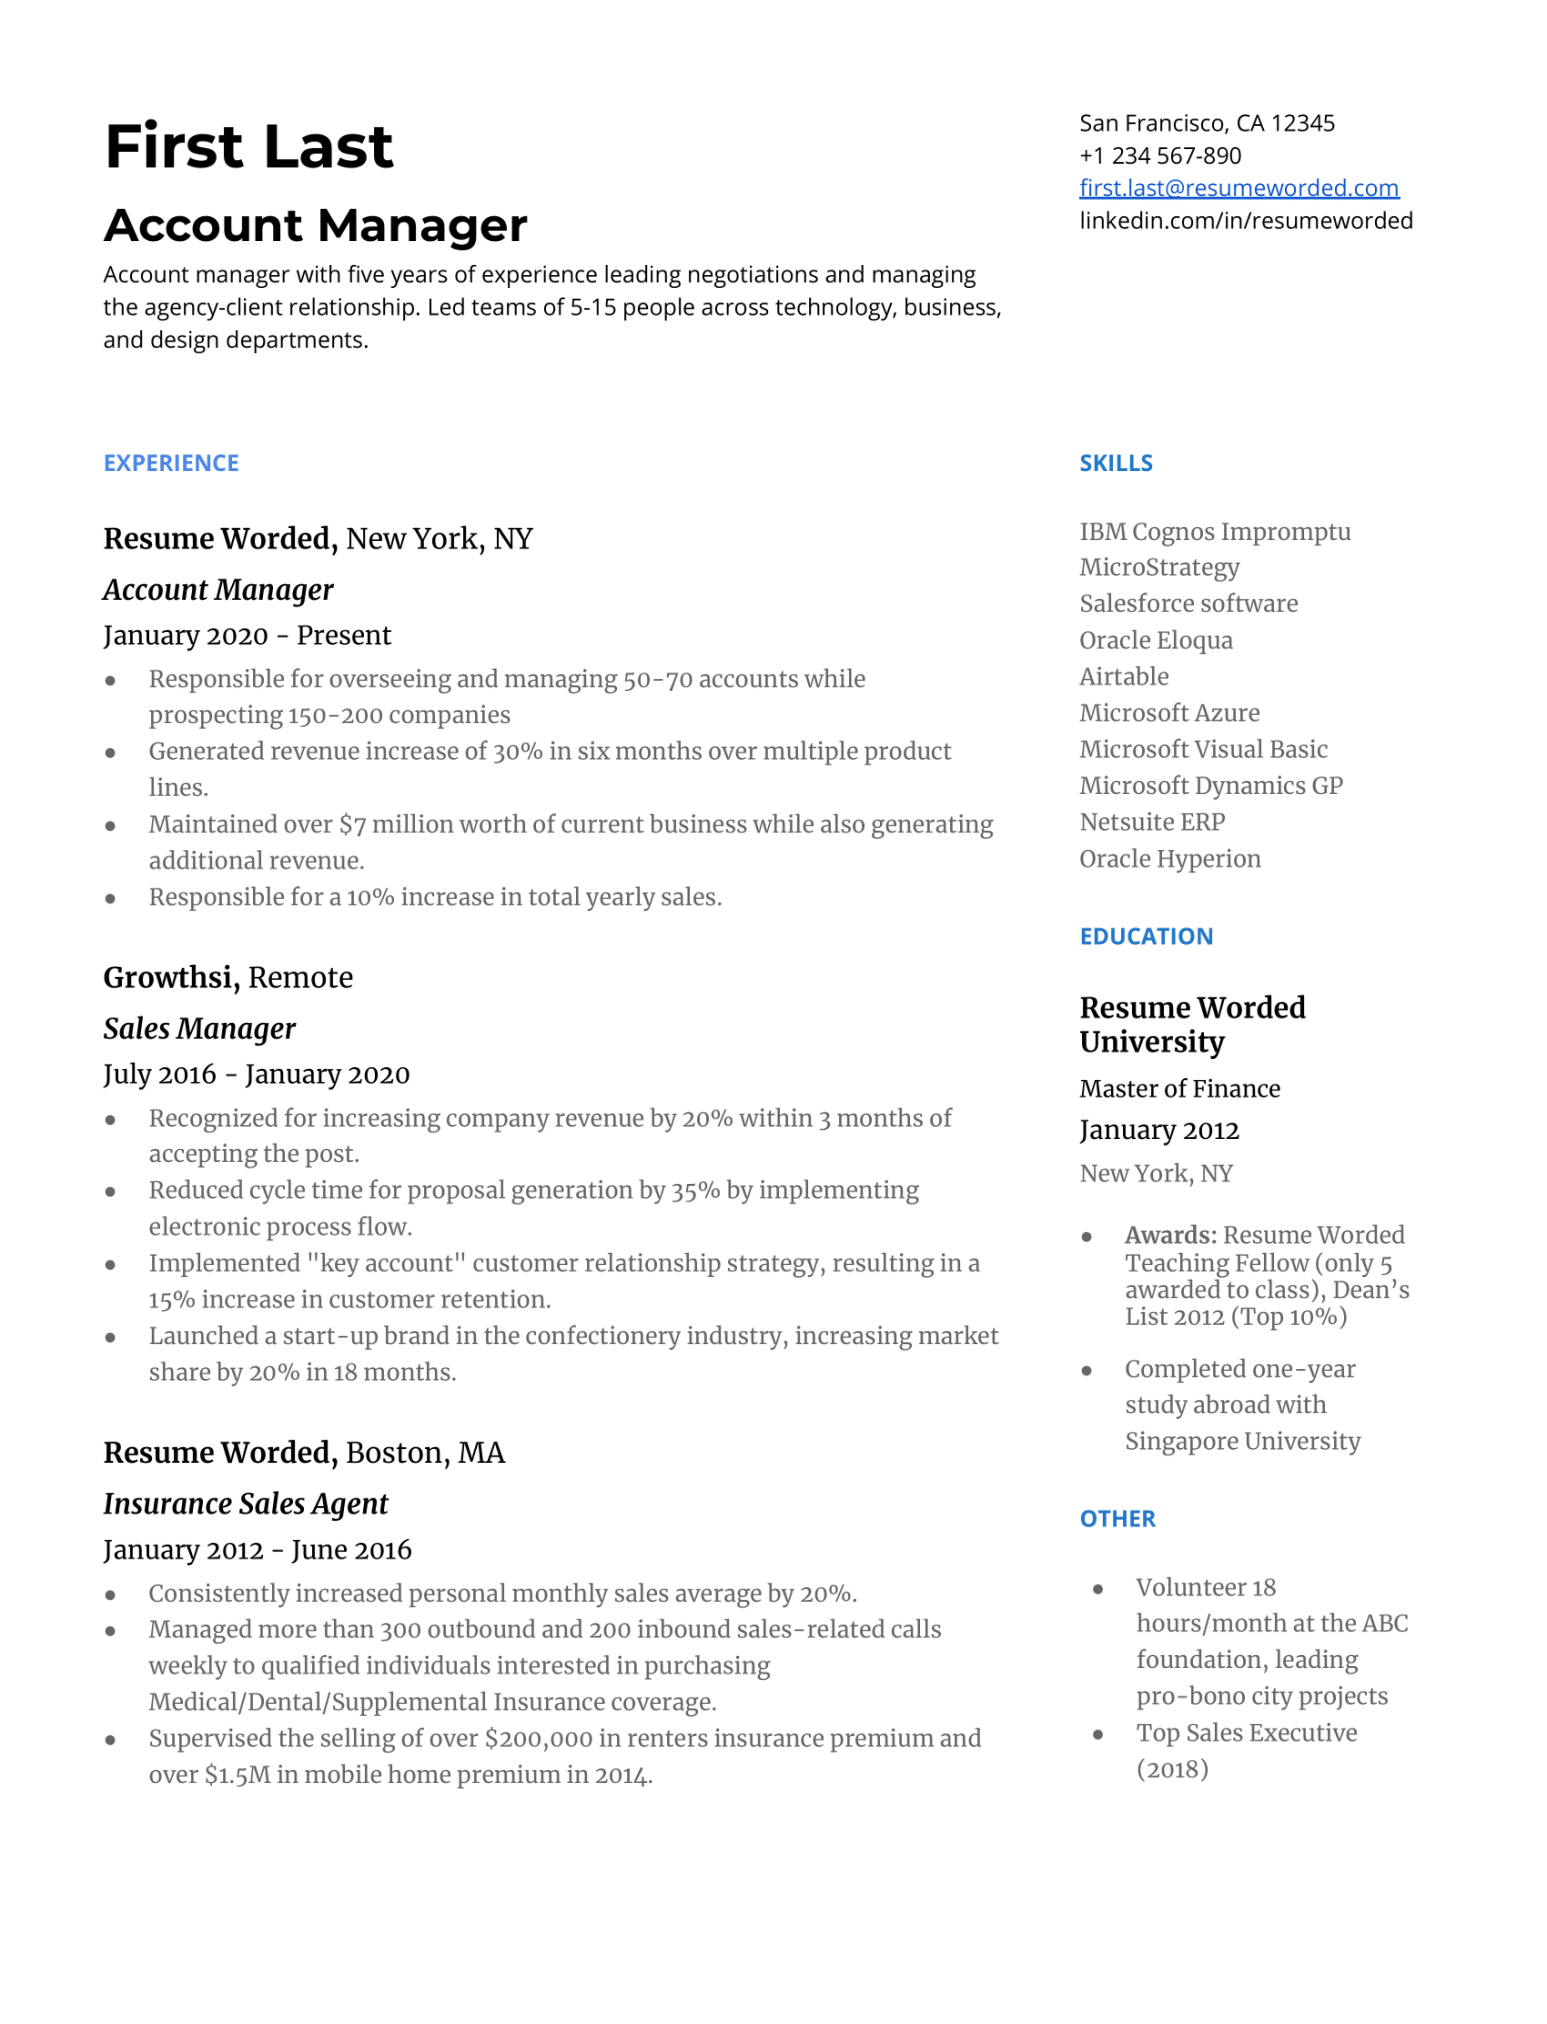 account manager resume examples for resume worded